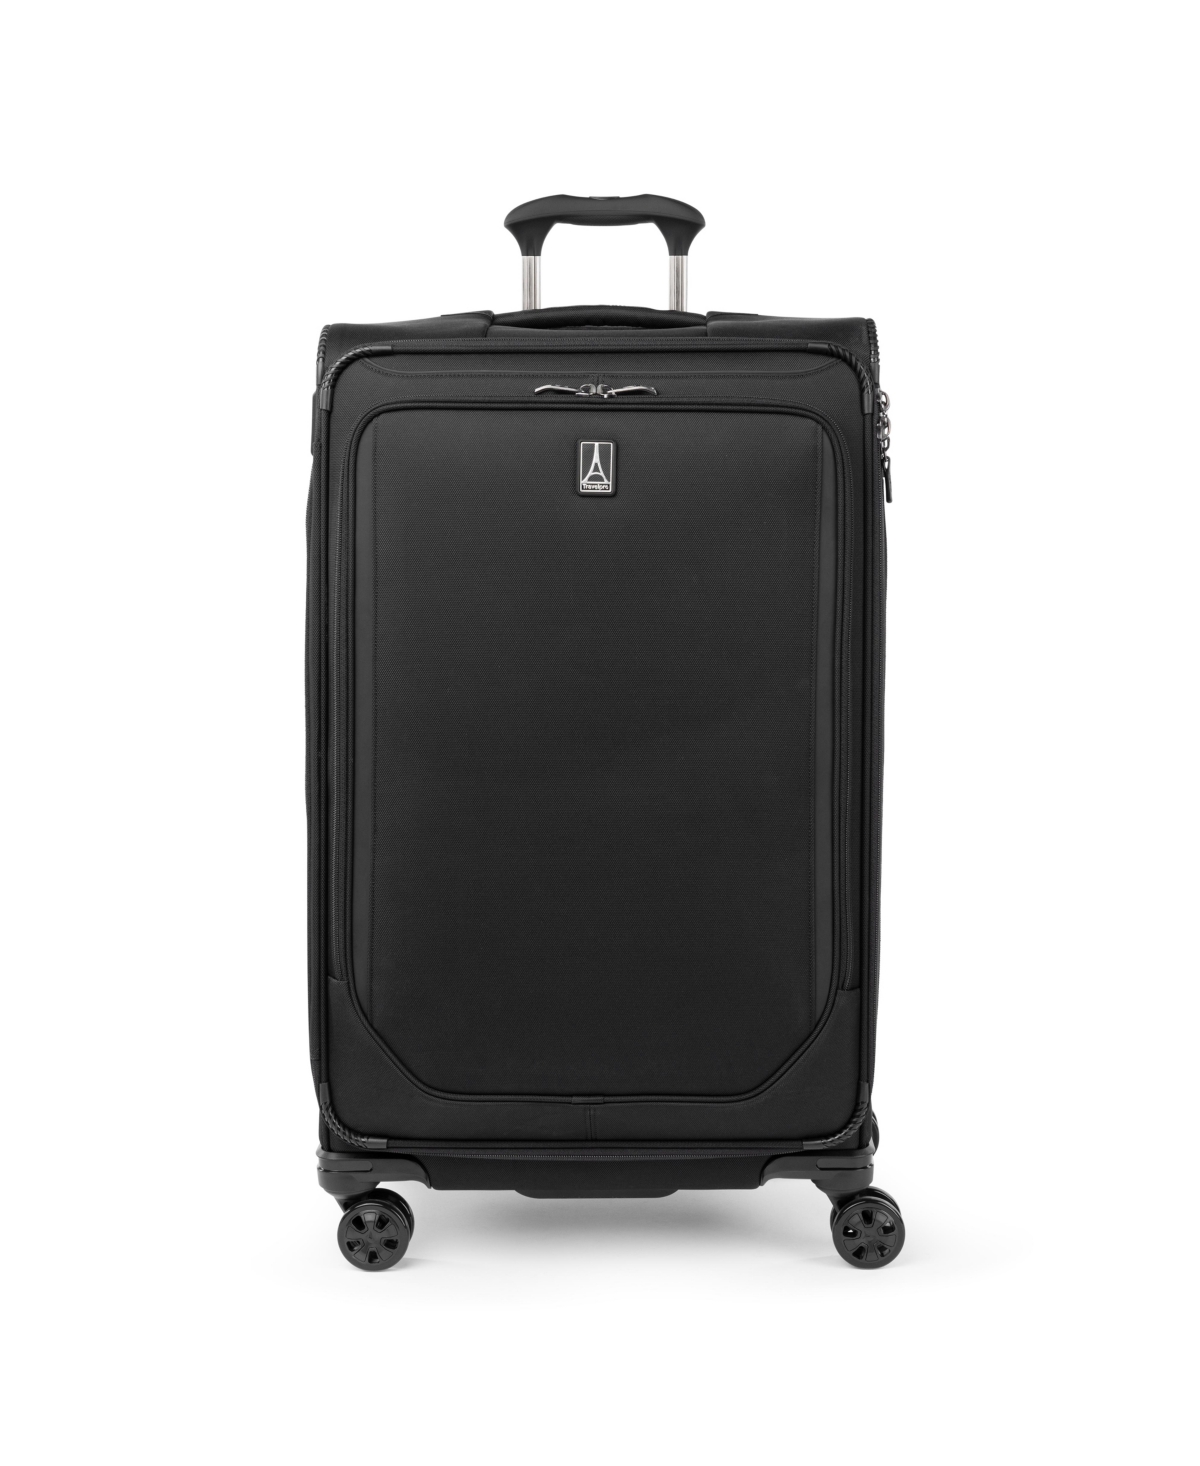 New! Travelpro Crew Classic Large Check-in Expandable Spinner Luggage - Patriot Blue